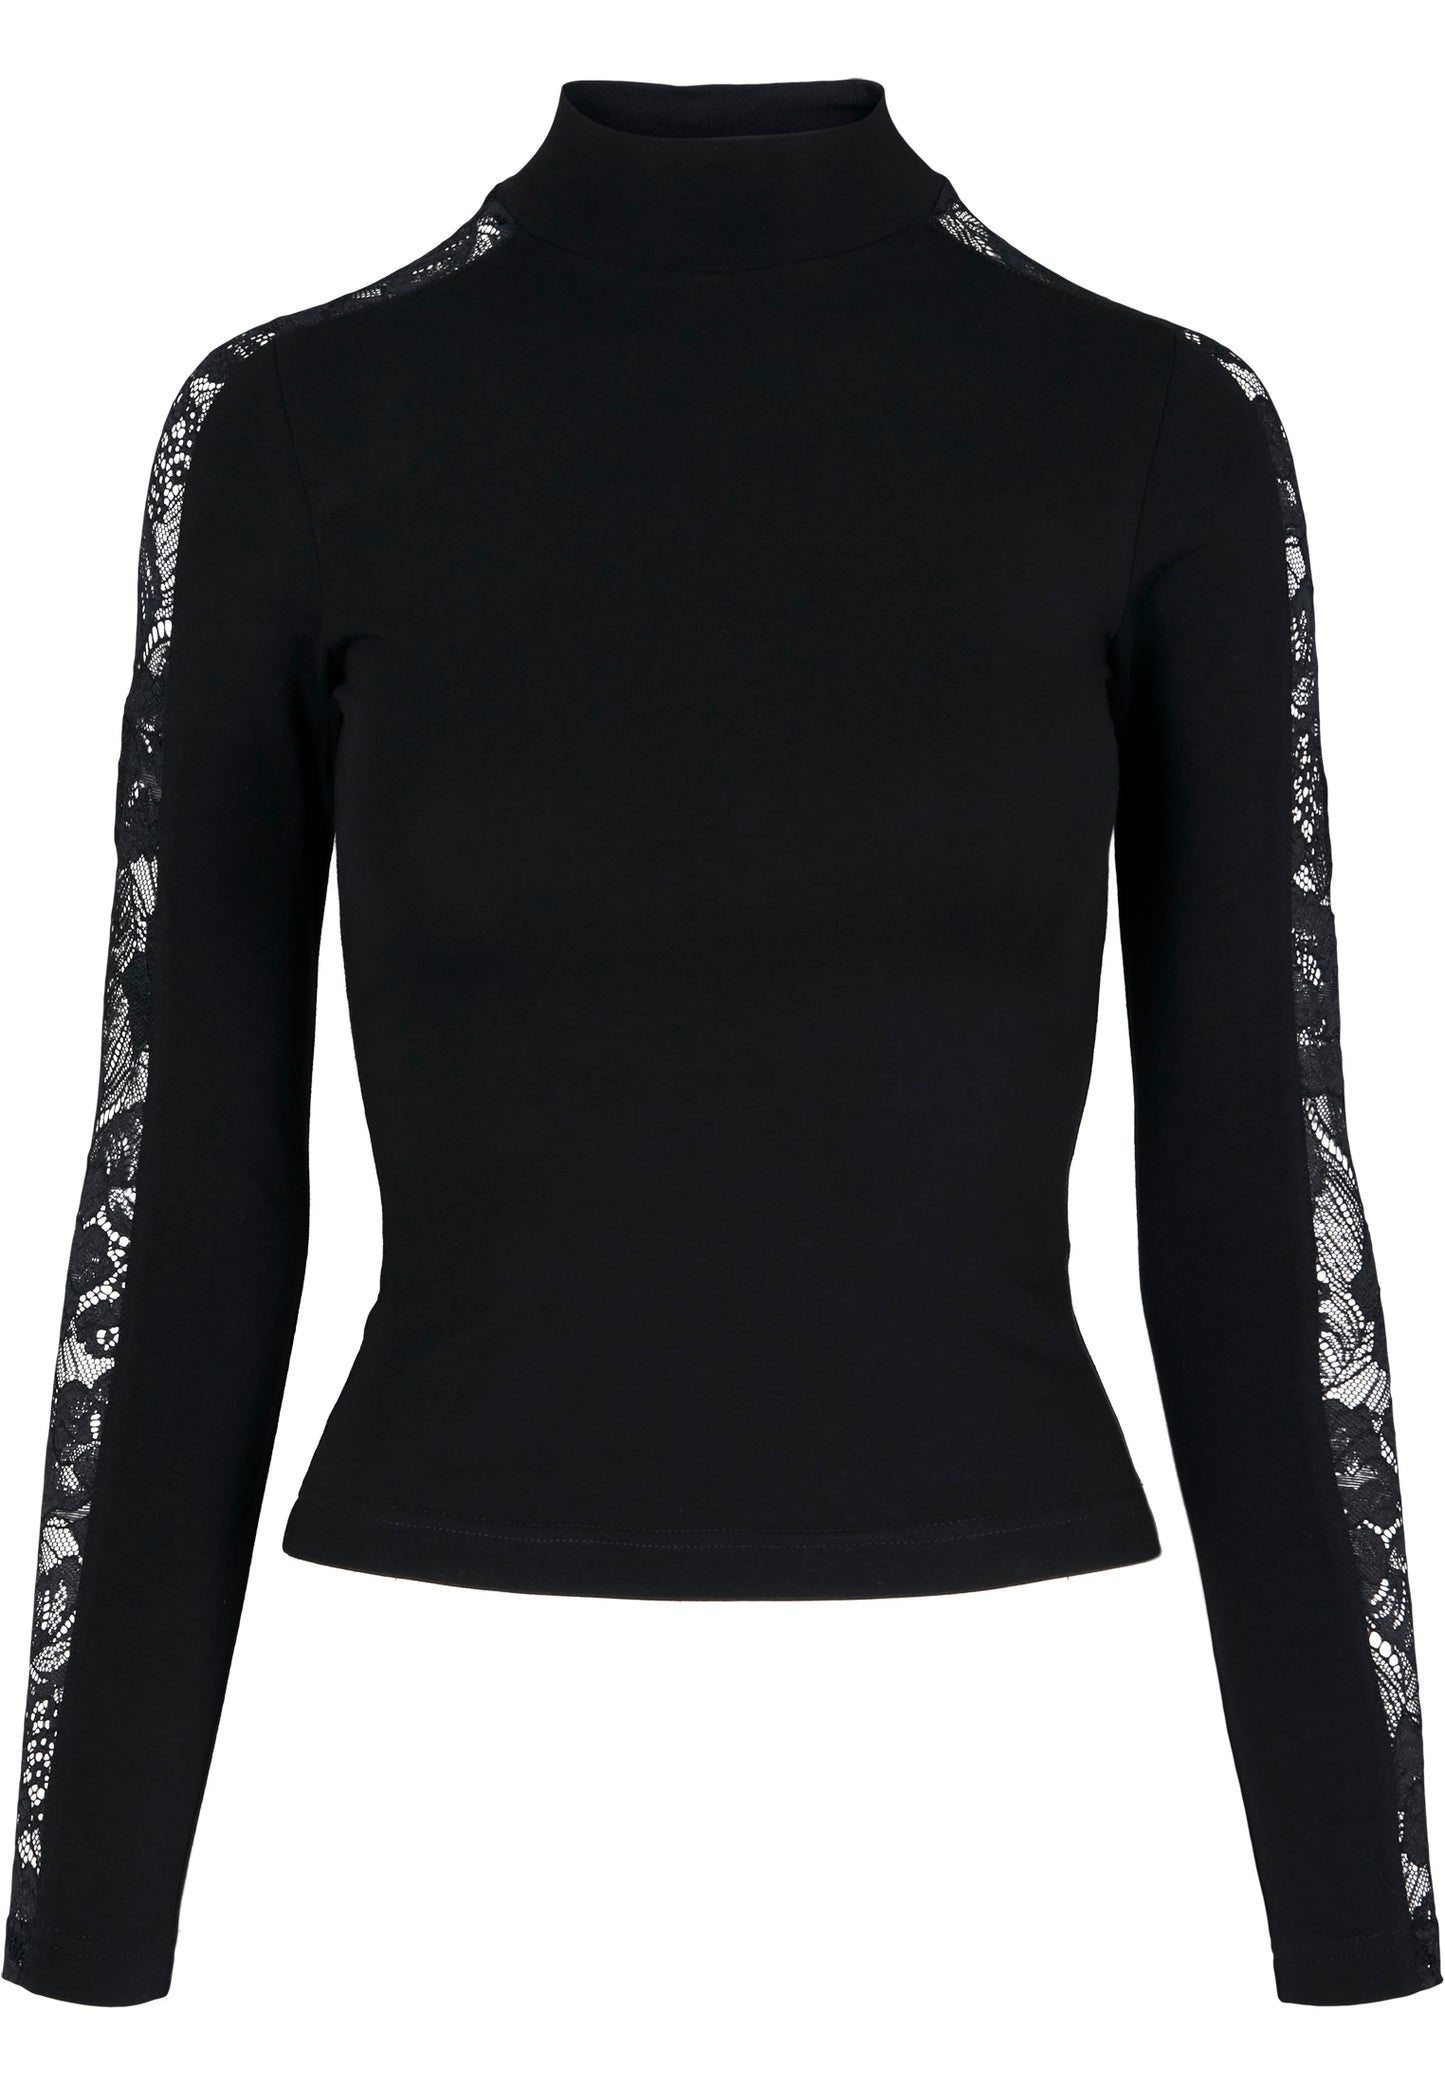 Urban Classics Lace Shoulder Long Sleeve Top - Kate's Clothing